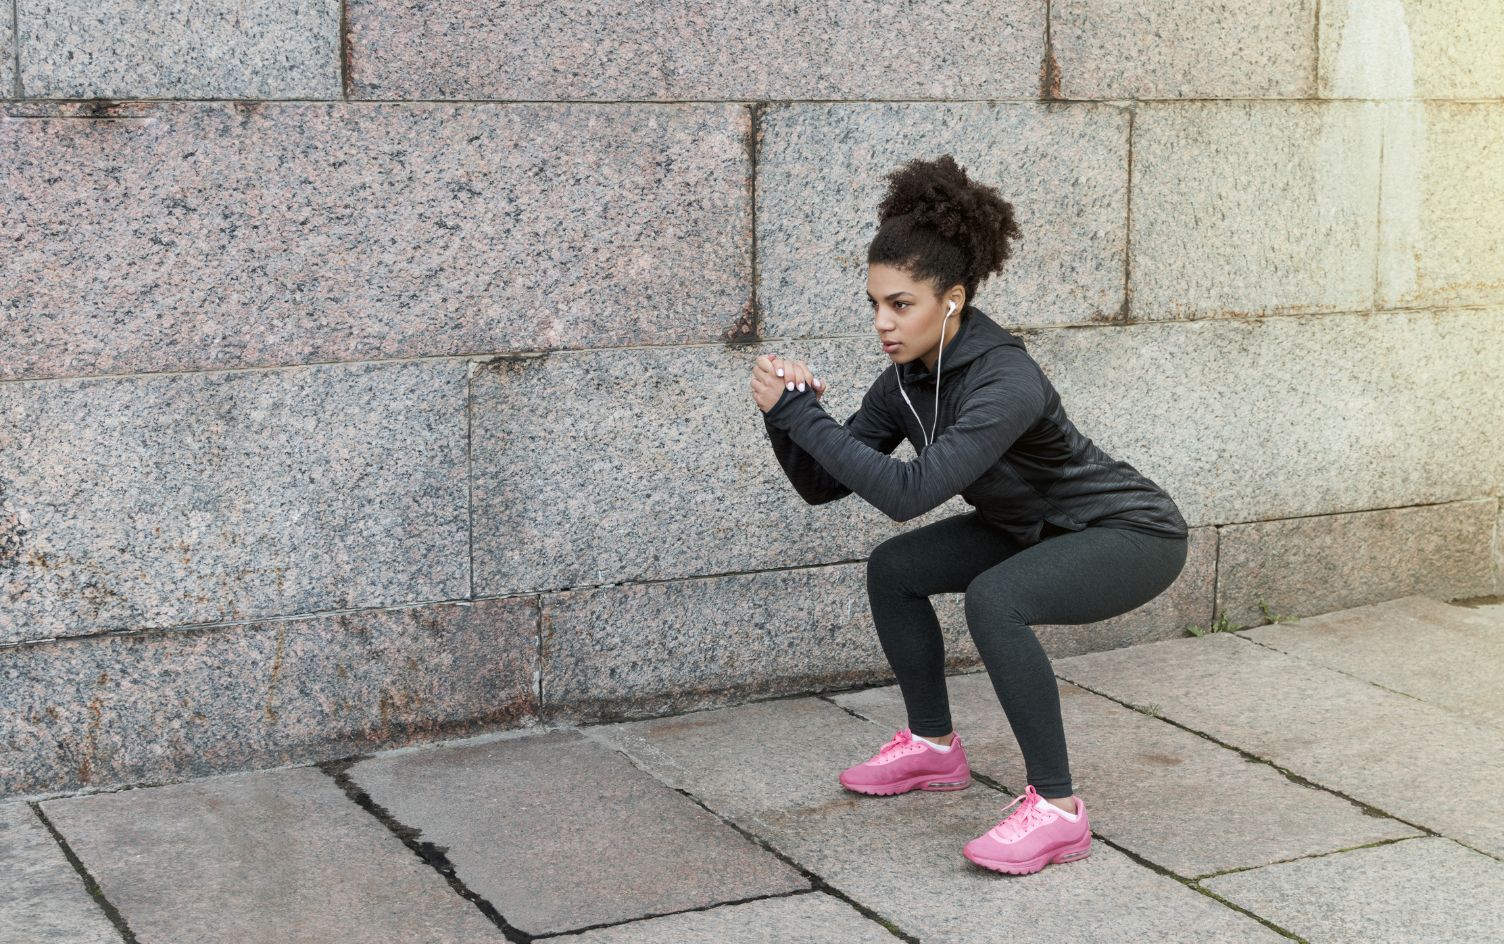 6 Ways to Avoid Workout Plateaus and Consistently Progress